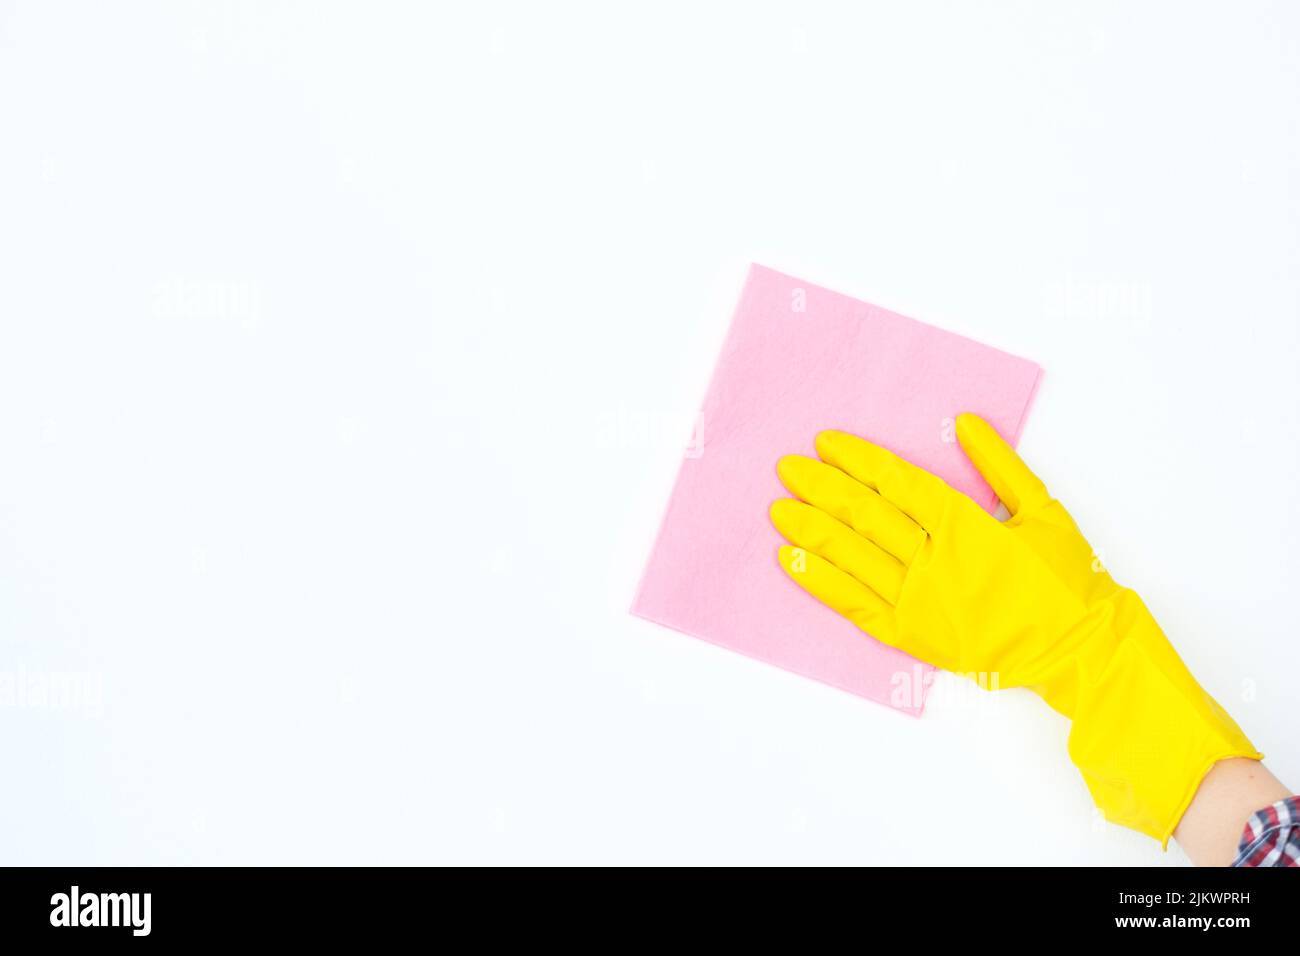 cleaning sanitation healthy home hand yellow glove Stock Photo